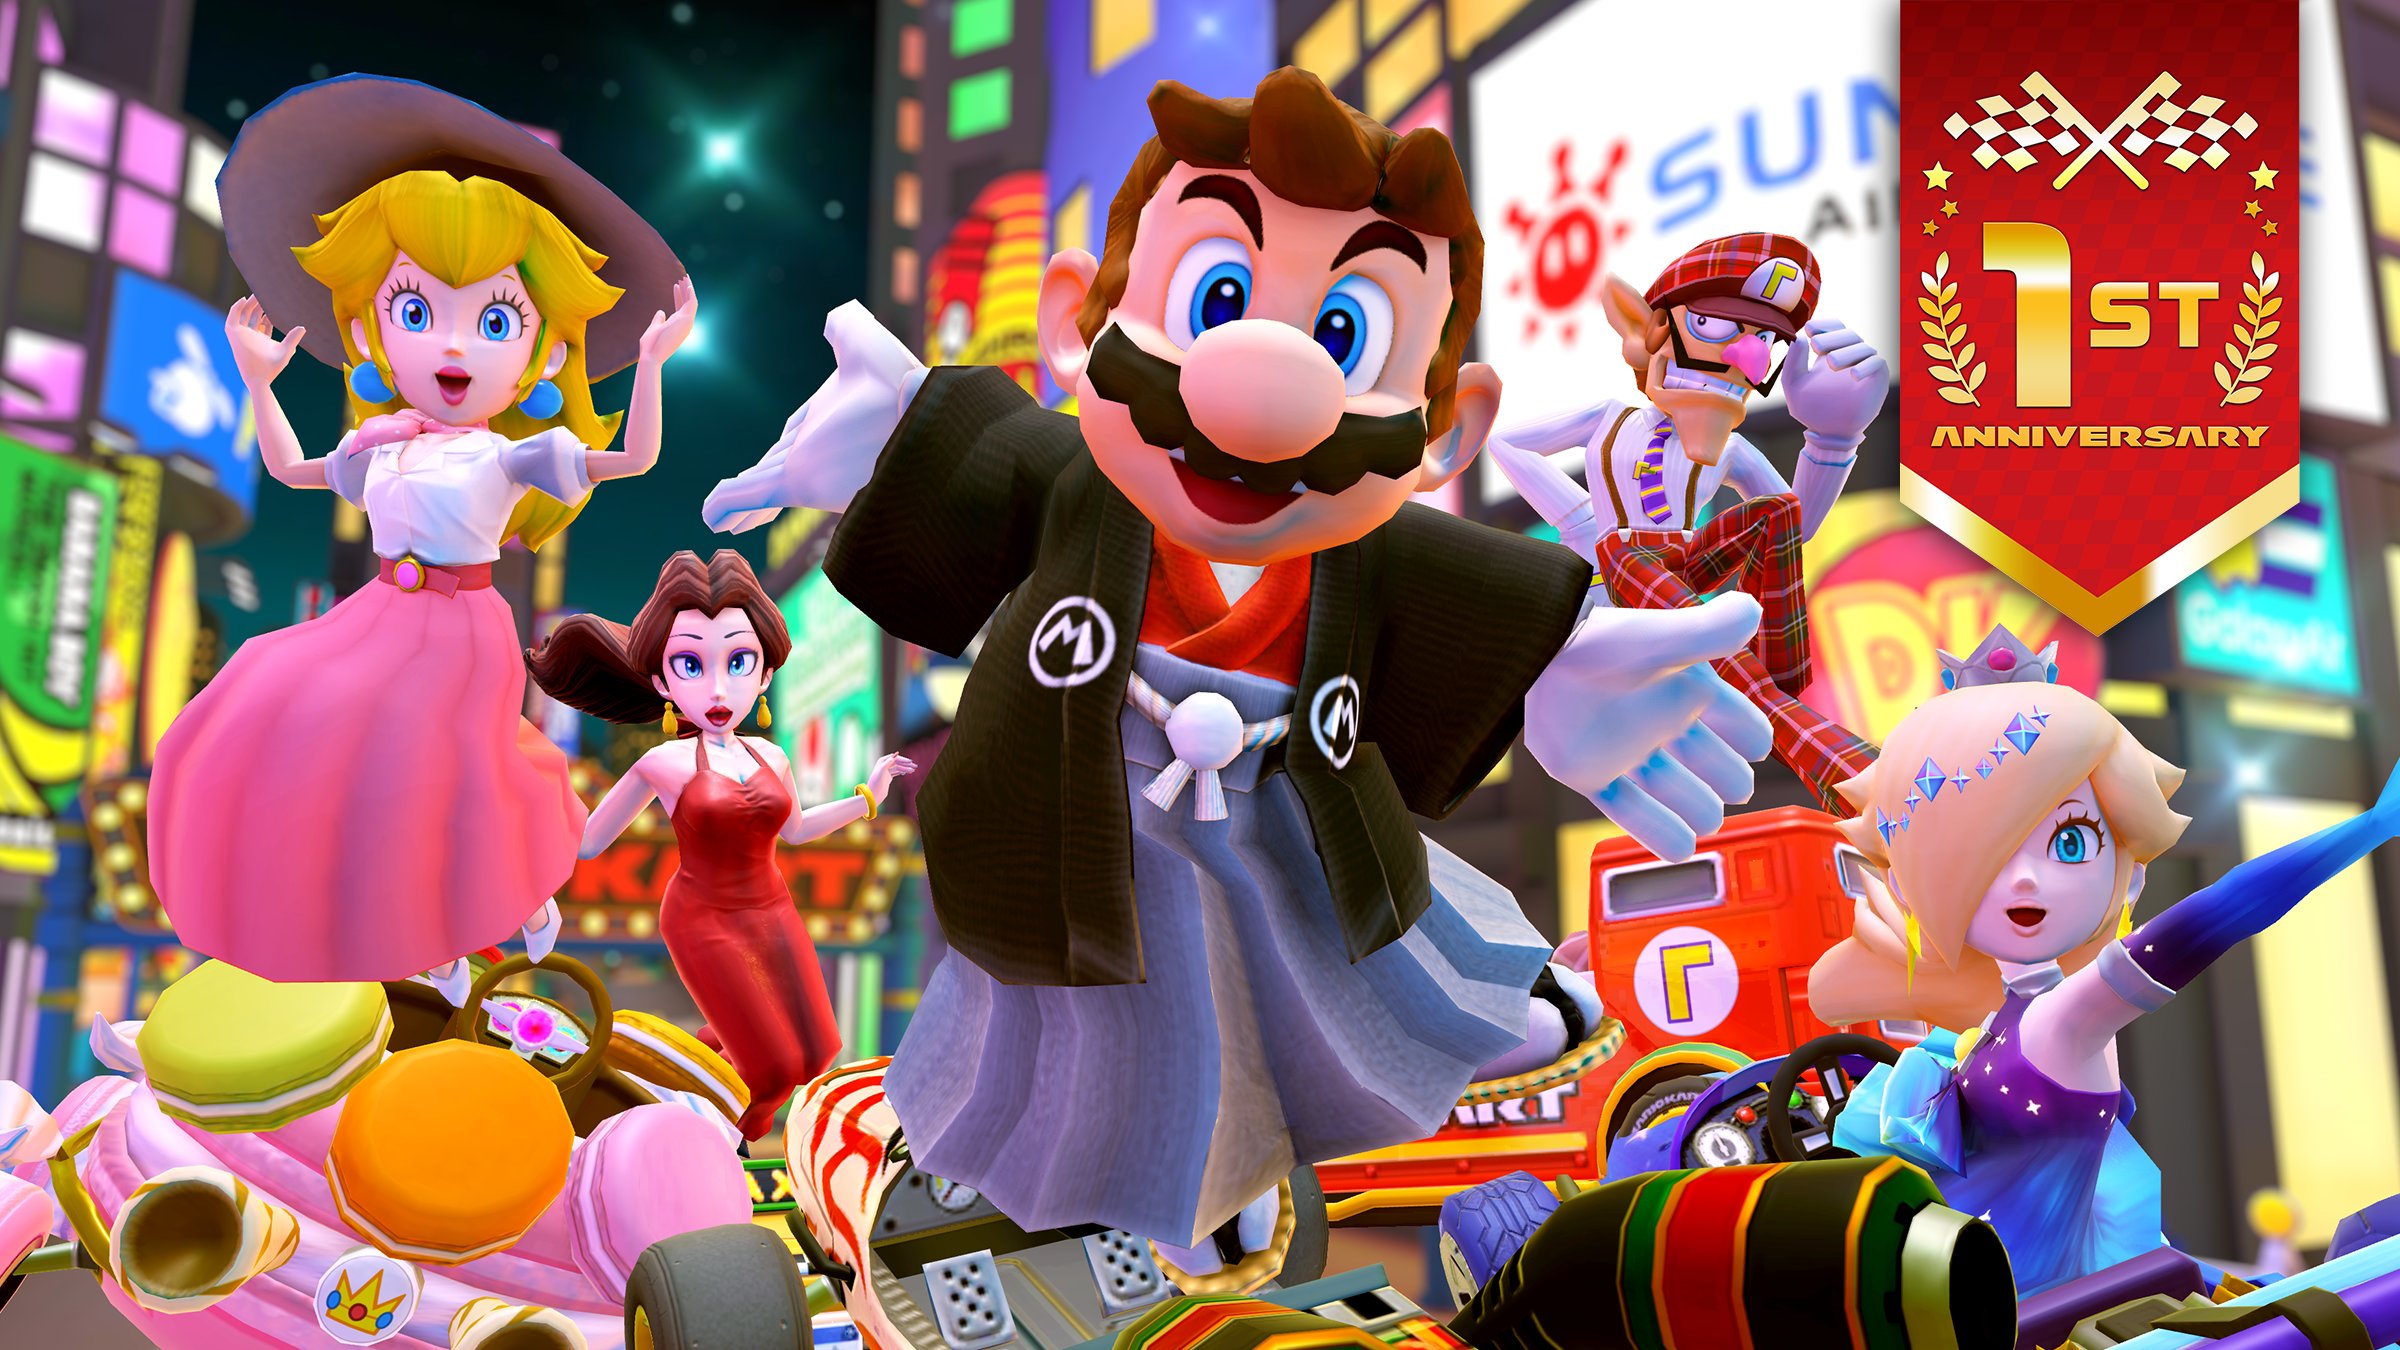 Mario Kart Tour 1st Anniversary Tour starts October 6 and brings back